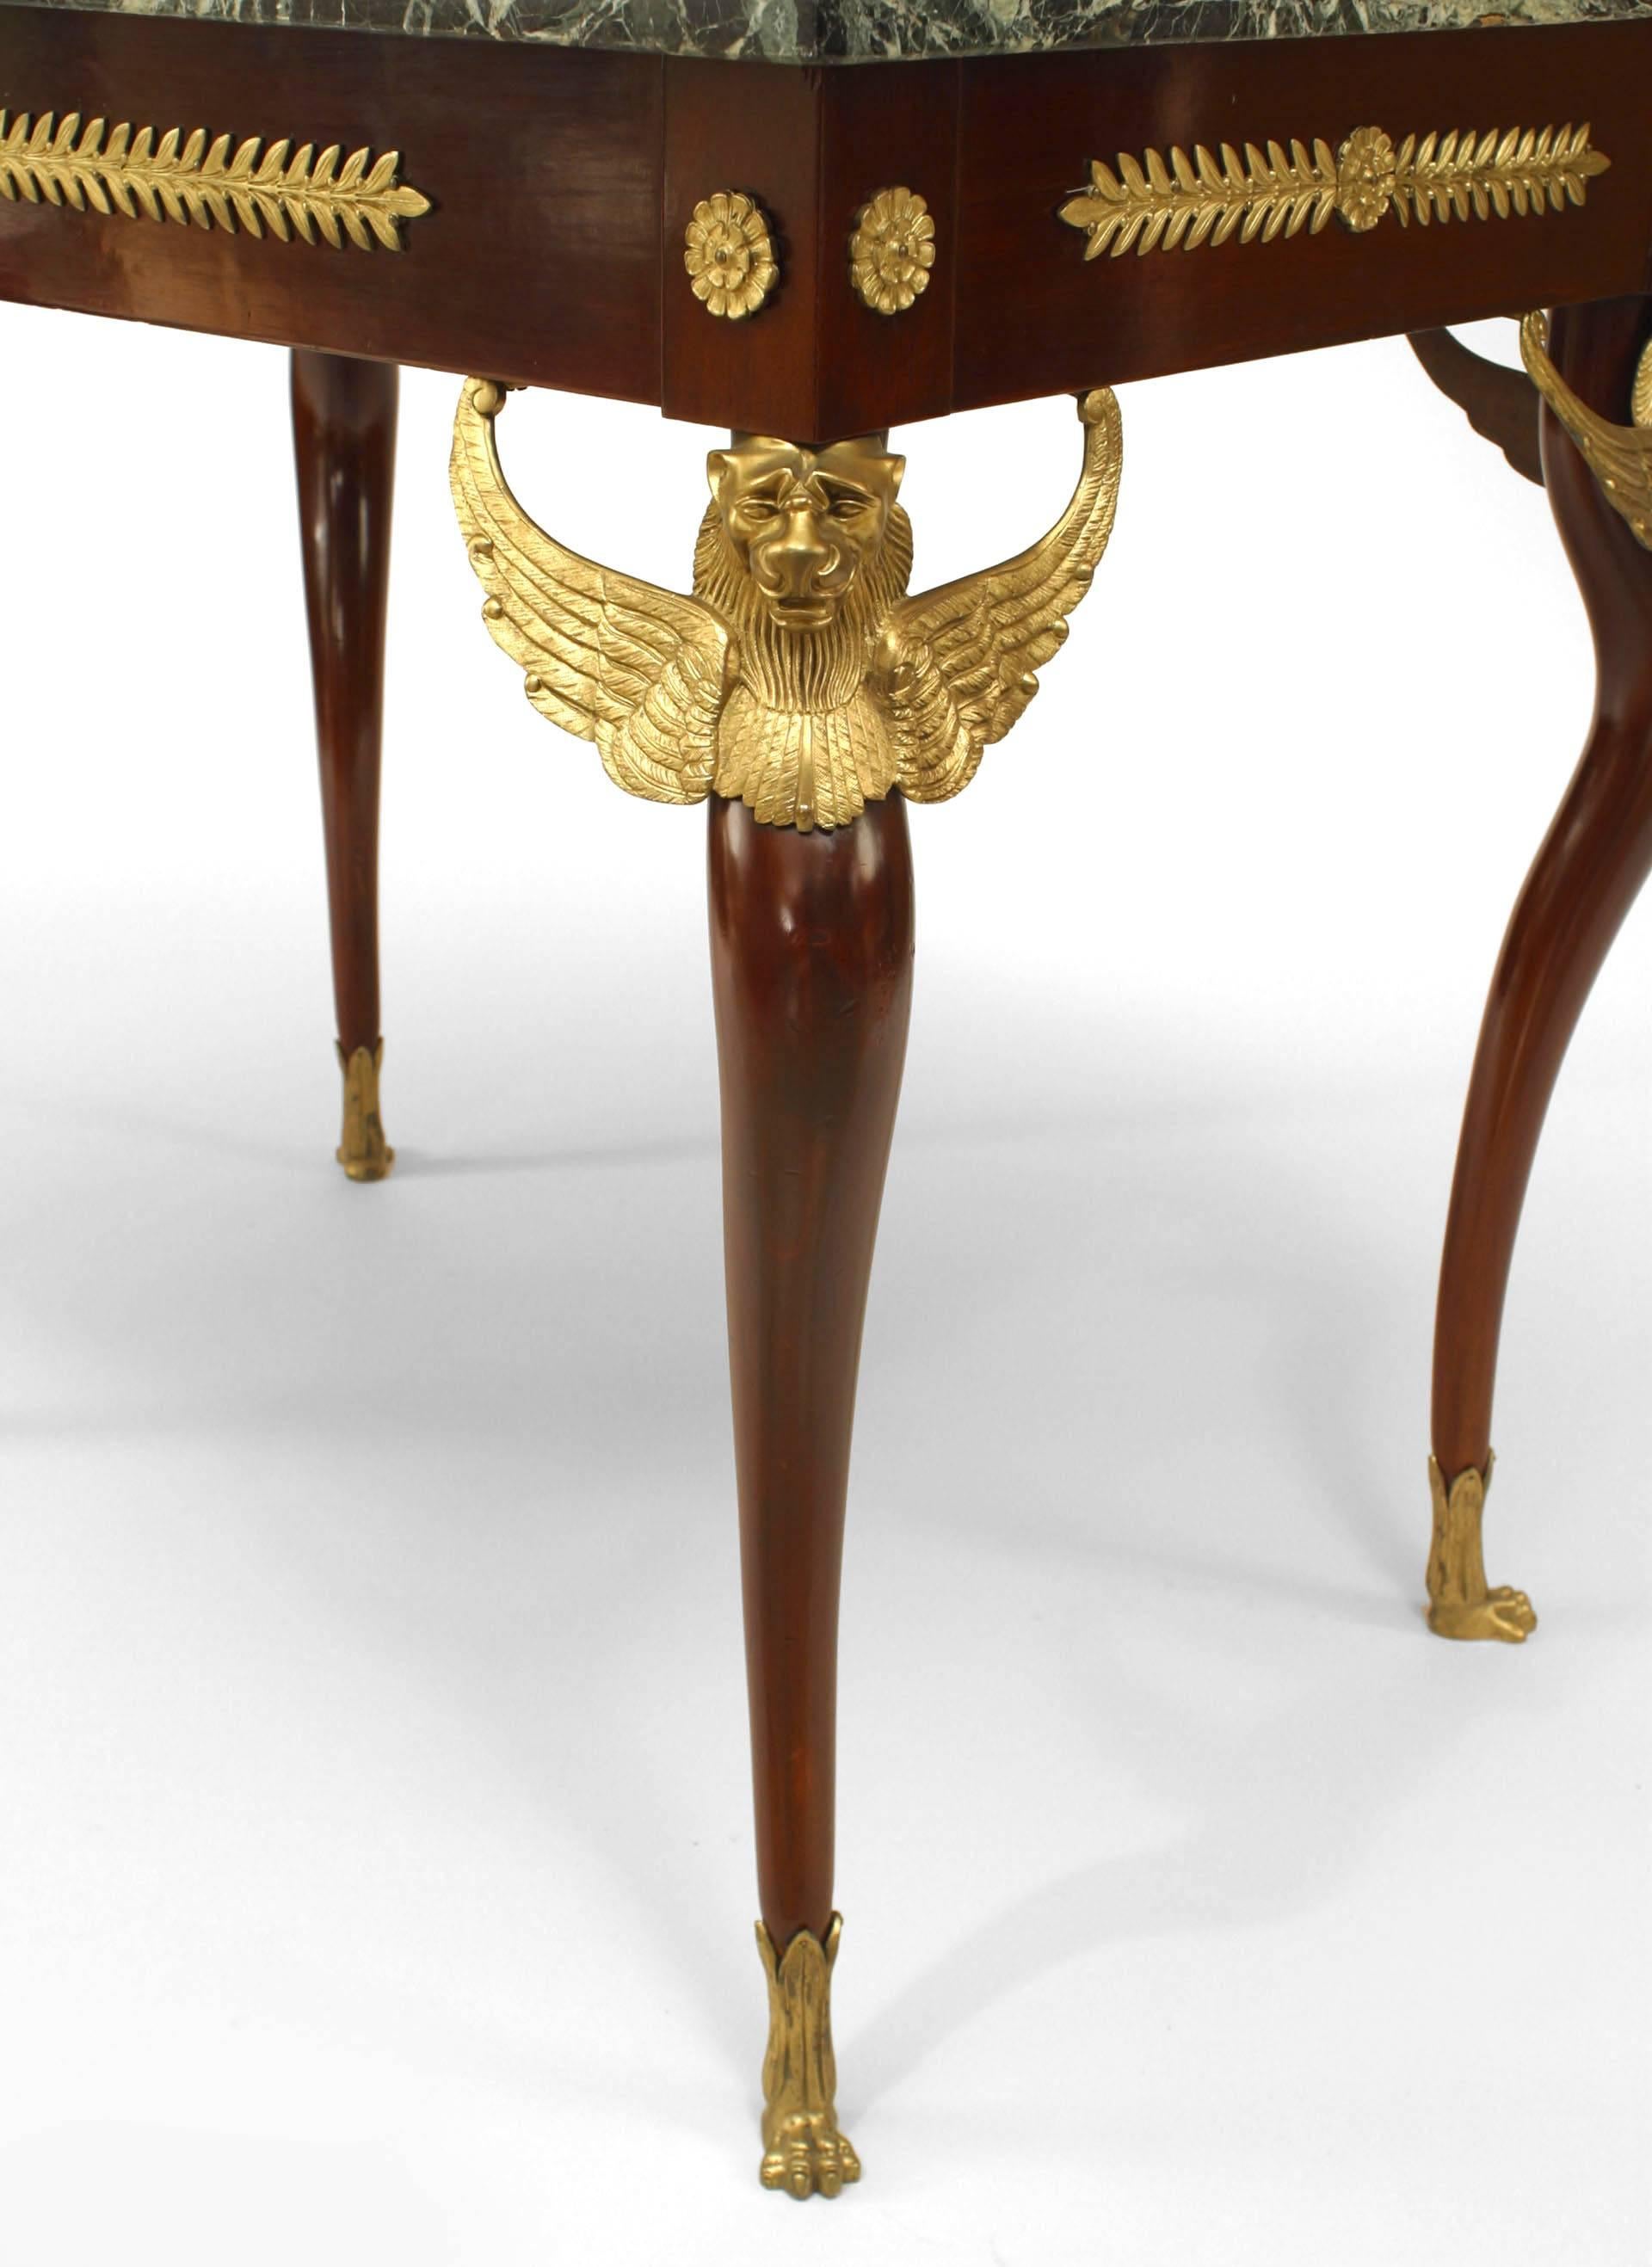 French Empire-style (19th Century) mahogany end/center table with bronze trim and winged griffins on legs with a green rectangular marble top.
